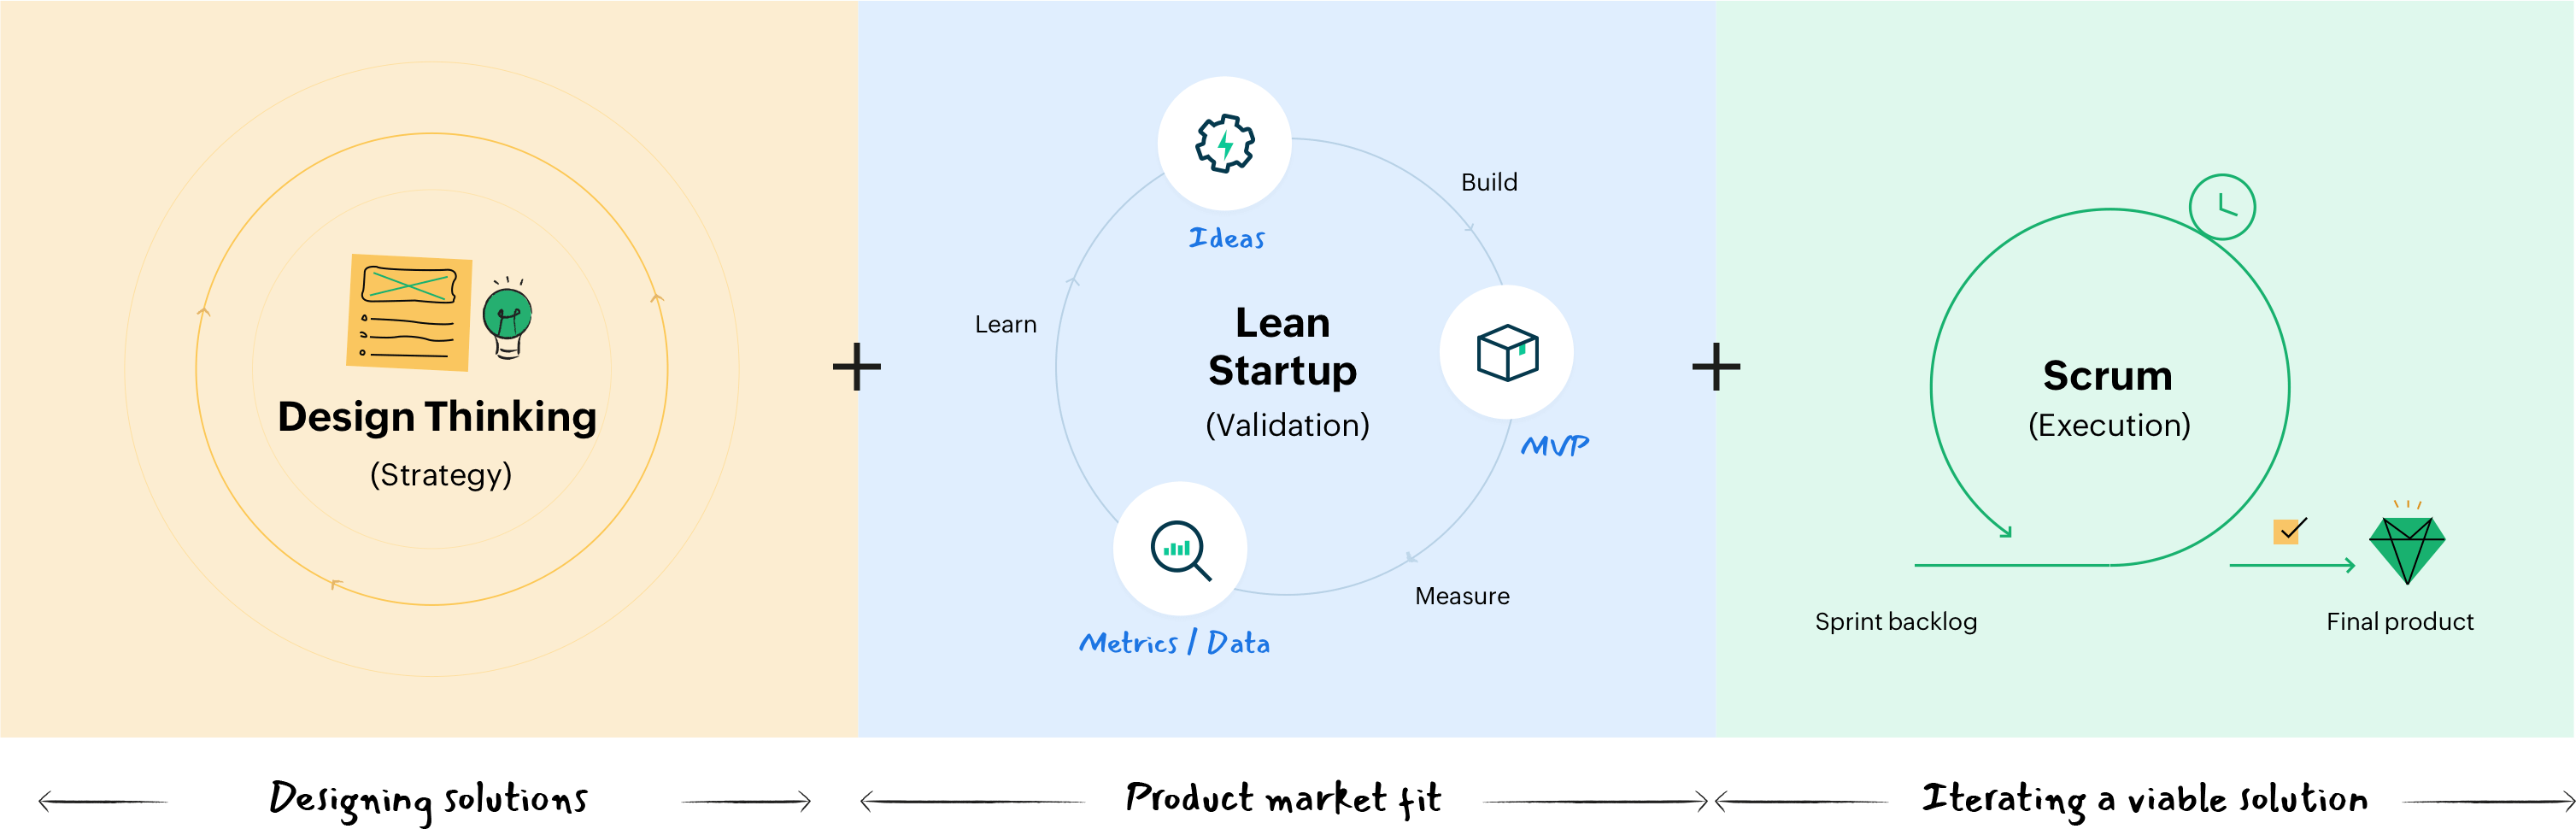 Design thinking + Lean startup + Agility